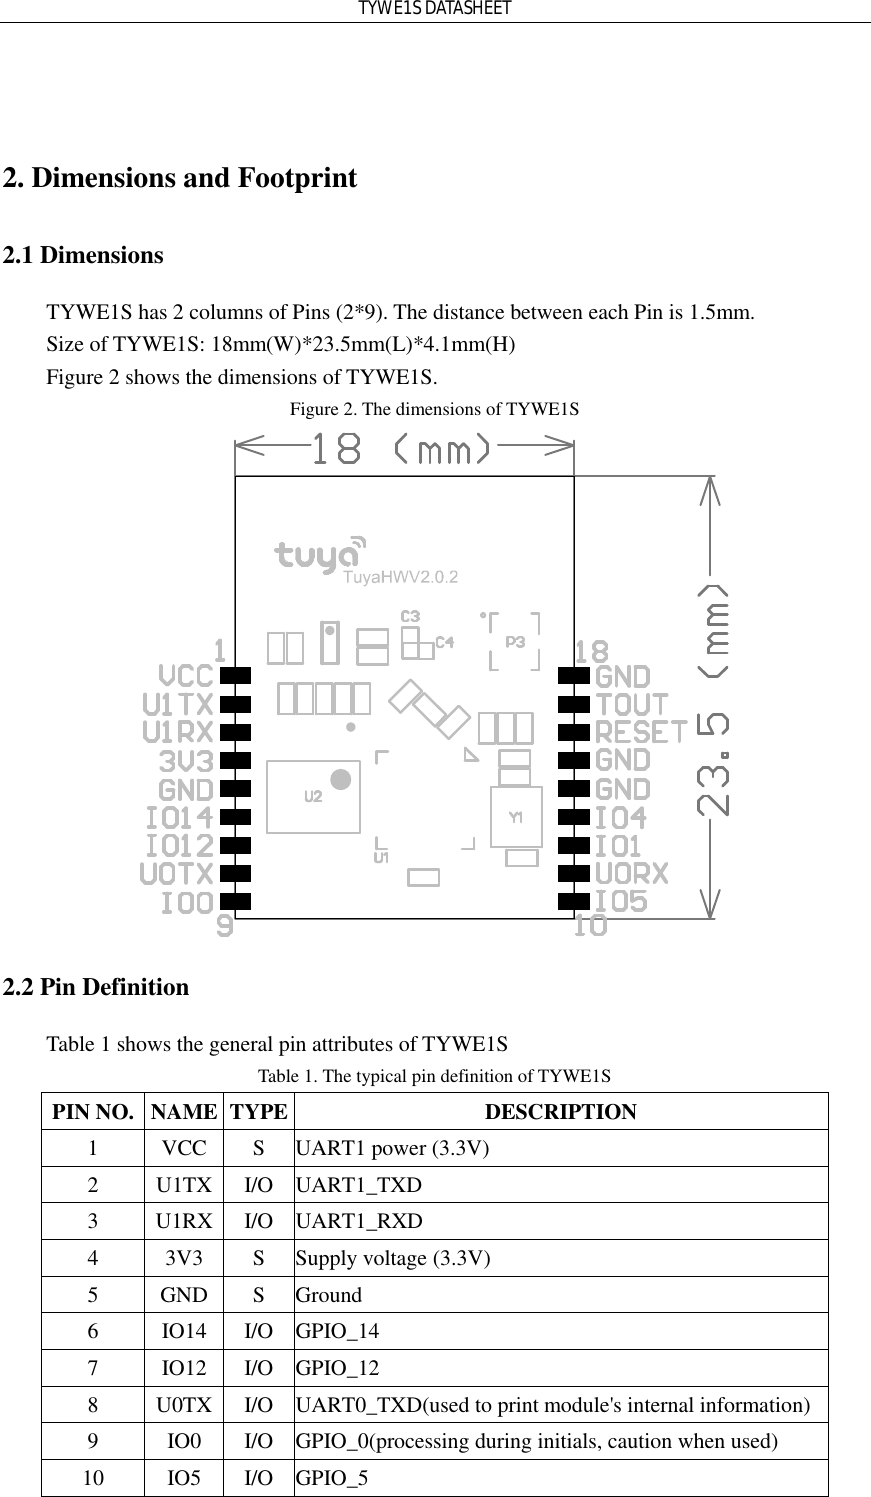 TYWE1S DATASHEET  2. Dimensions and Footprint 2.1 Dimensions TYWE1S has 2 columns of Pins (2*9). The distance between each Pin is 1.5mm. Size of TYWE1S: 18mm(W)*23.5mm(L)*4.1mm(H) Figure 2 shows the dimensions of TYWE1S. Figure 2. The dimensions of TYWE1S  2.2 Pin Definition Table 1 shows the general pin attributes of TYWE1S Table 1. The typical pin definition of TYWE1S PIN NO. NAME TYPE DESCRIPTION 1  VCC S UART1 power (3.3V) 2  U1TX I/O UART1_TXD 3  U1RX I/O UART1_RXD 4  3V3  S Supply voltage (3.3V) 5  GND S Ground 6  IO14 I/O GPIO_14 7  IO12 I/O GPIO_12 8  U0TX I/O UART0_TXD(used to print module&apos;s internal information) 9  IO0  I/O GPIO_0(processing during initials, caution when used) 10  IO5  I/O GPIO_5 